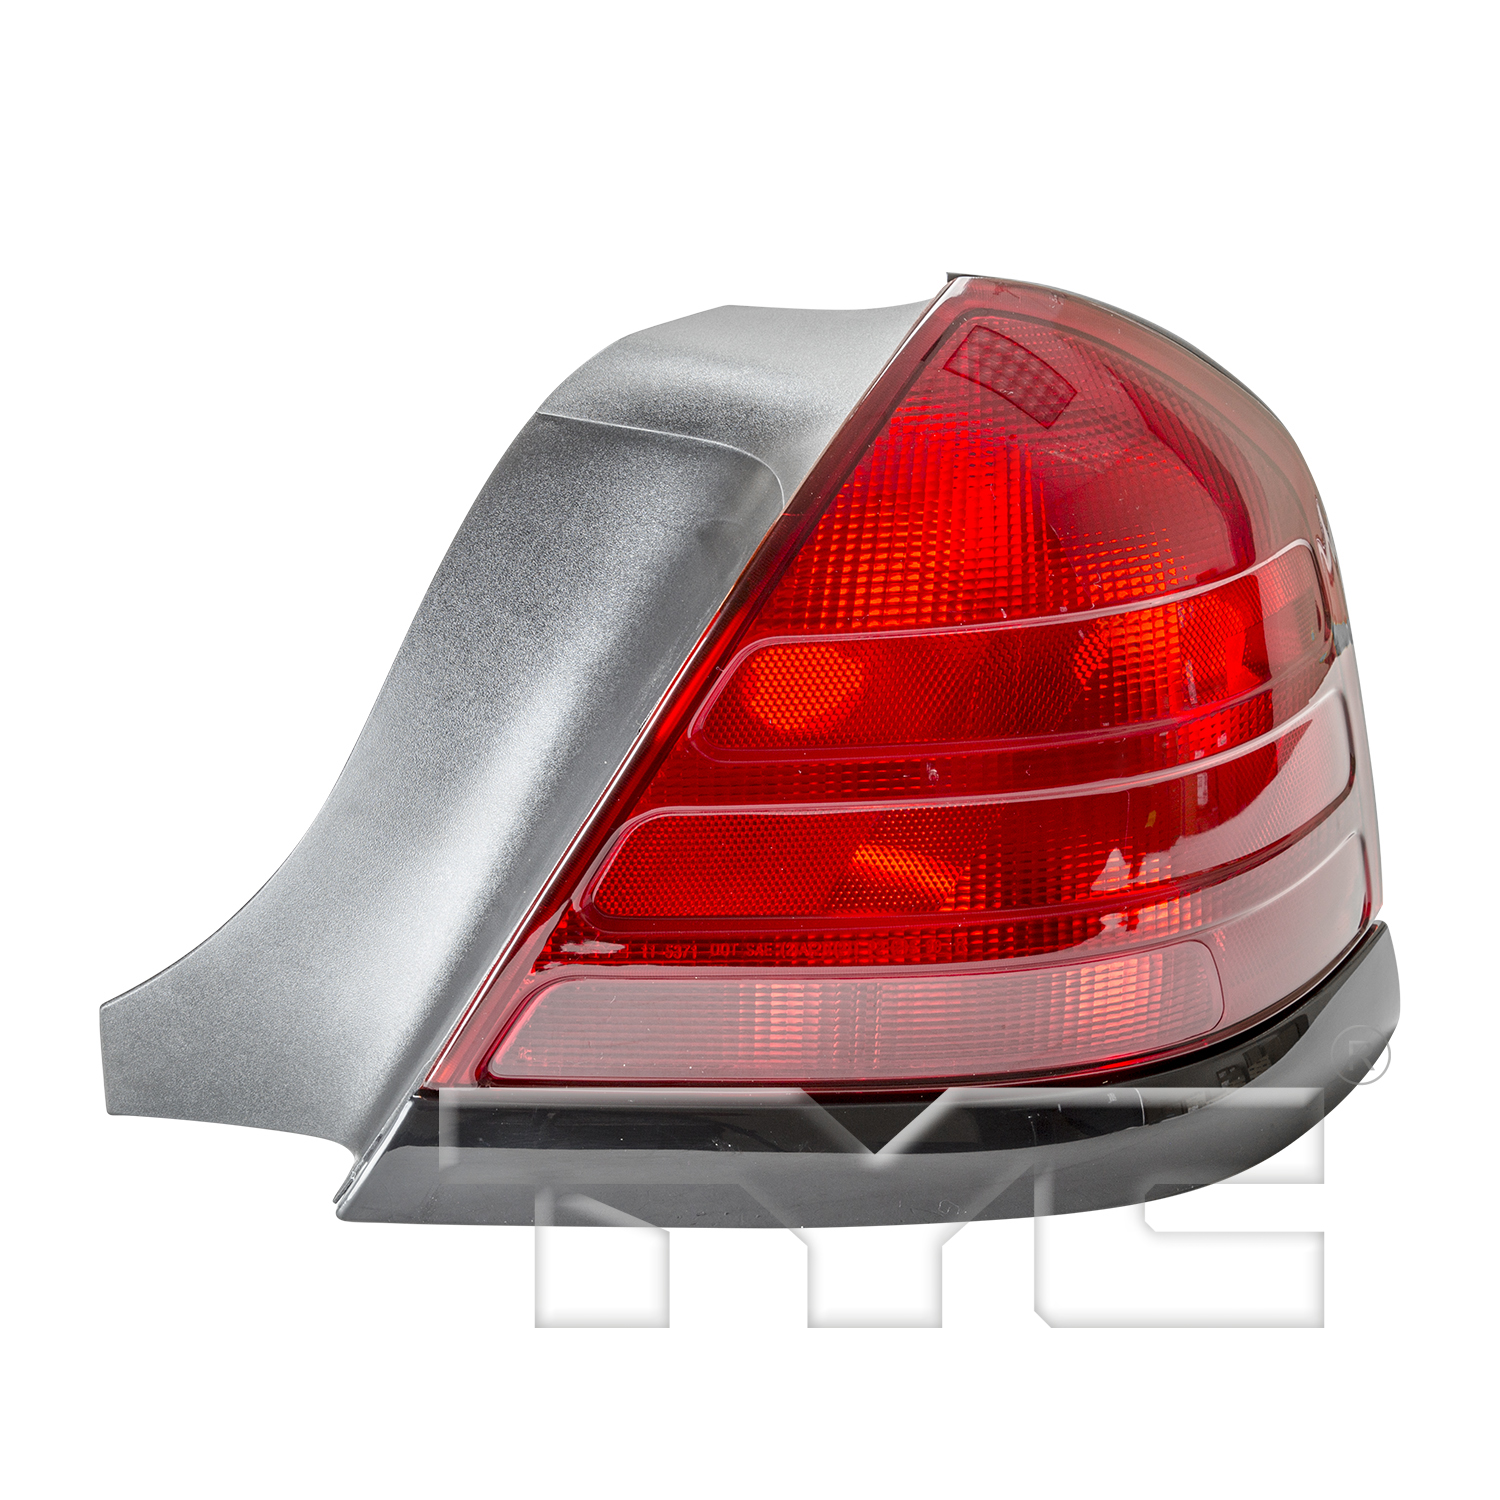 Aftermarket TAILLIGHTS for FORD - CROWN VICTORIA, CROWN VICTORIA,99-00,RT Taillamp assy